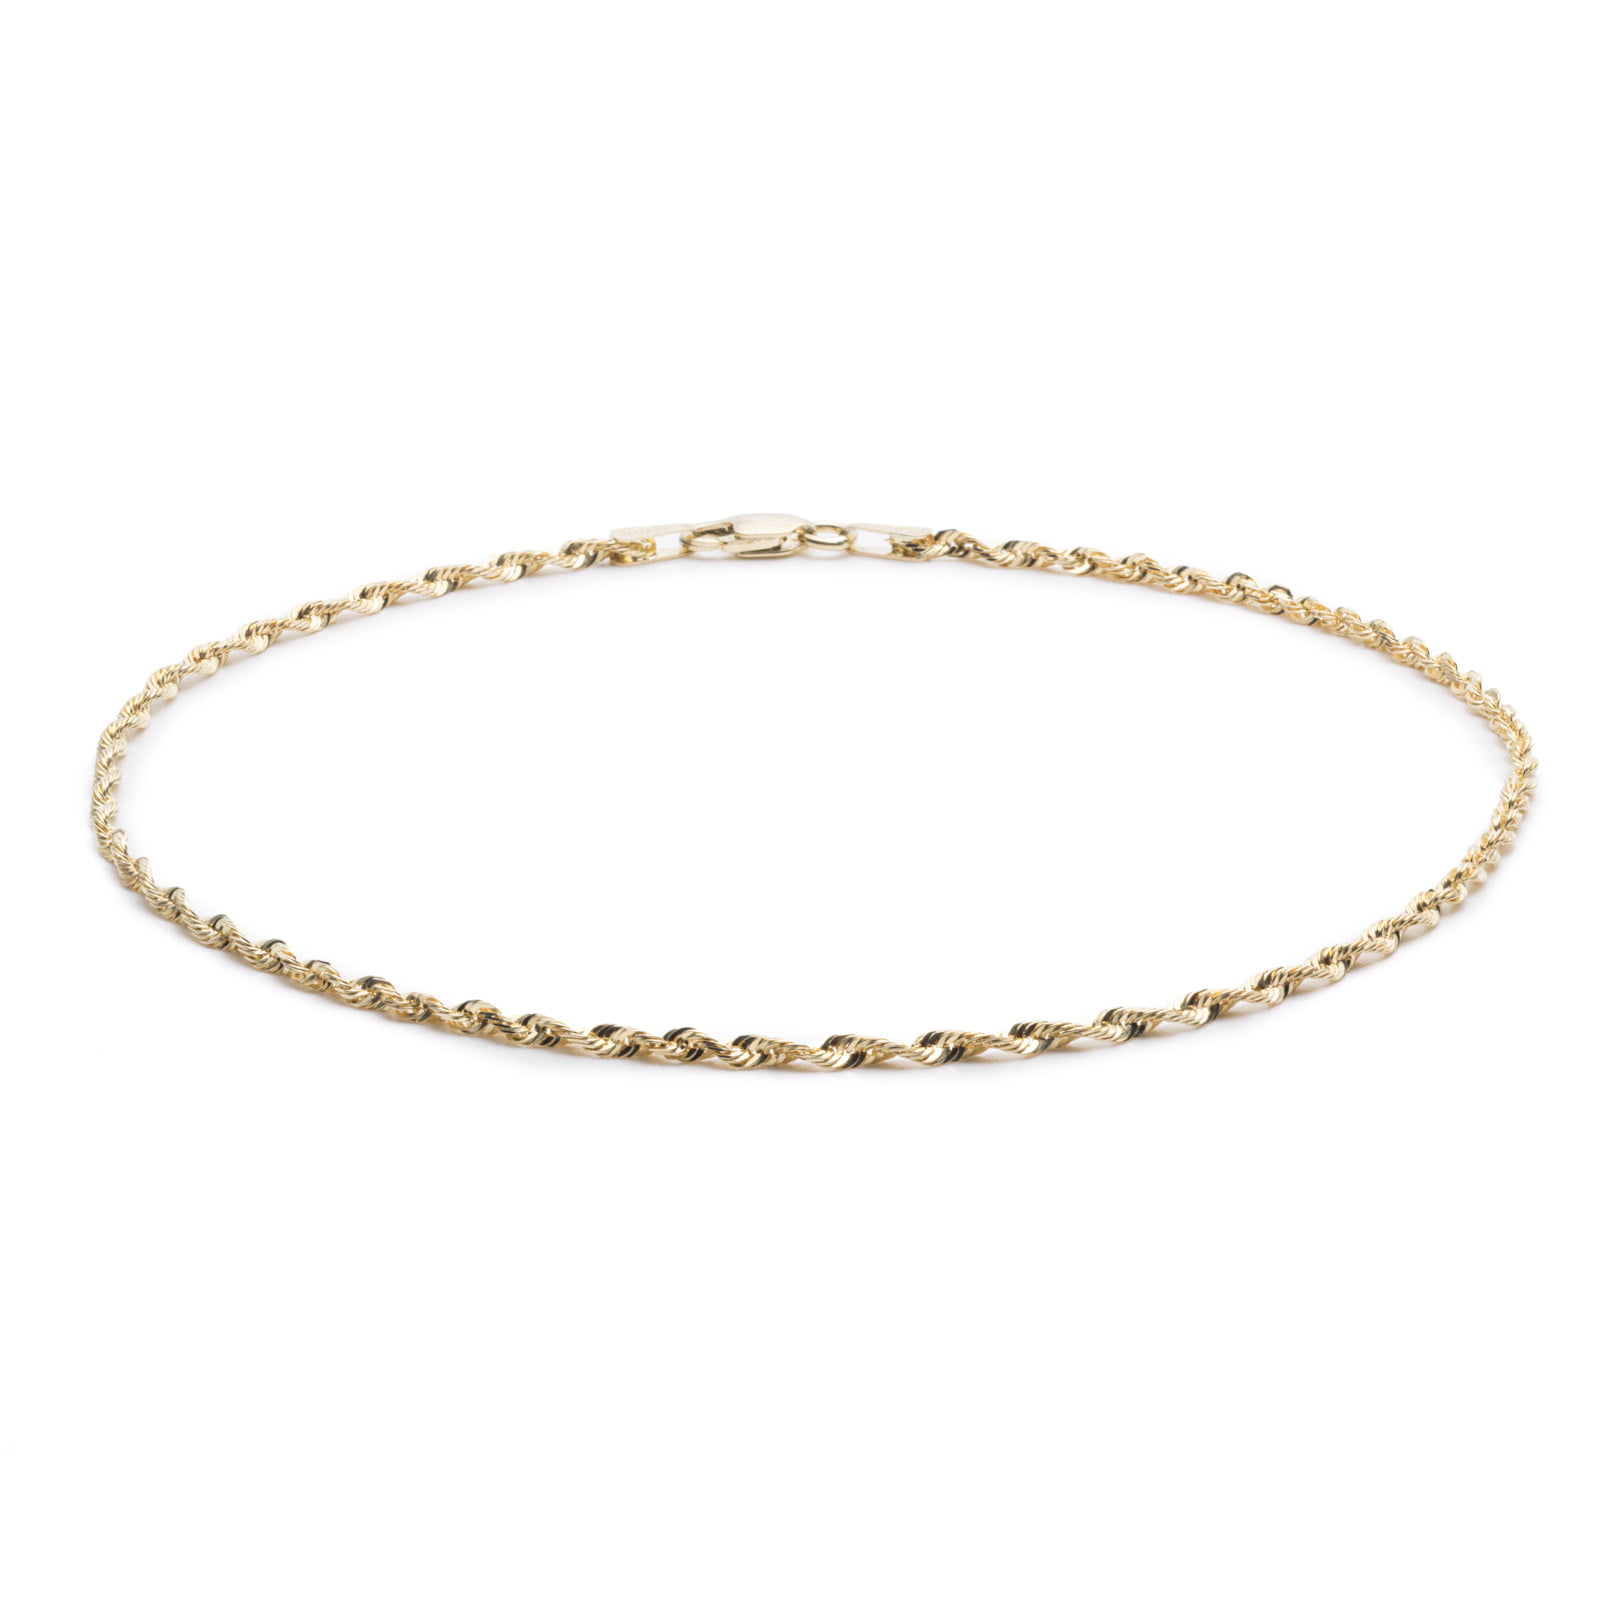 Floreo 10k Yellow Gold Solid Extra Light Diamond Cut Rope Chain Bracelet and Anklet for Men and Women 1.5mm